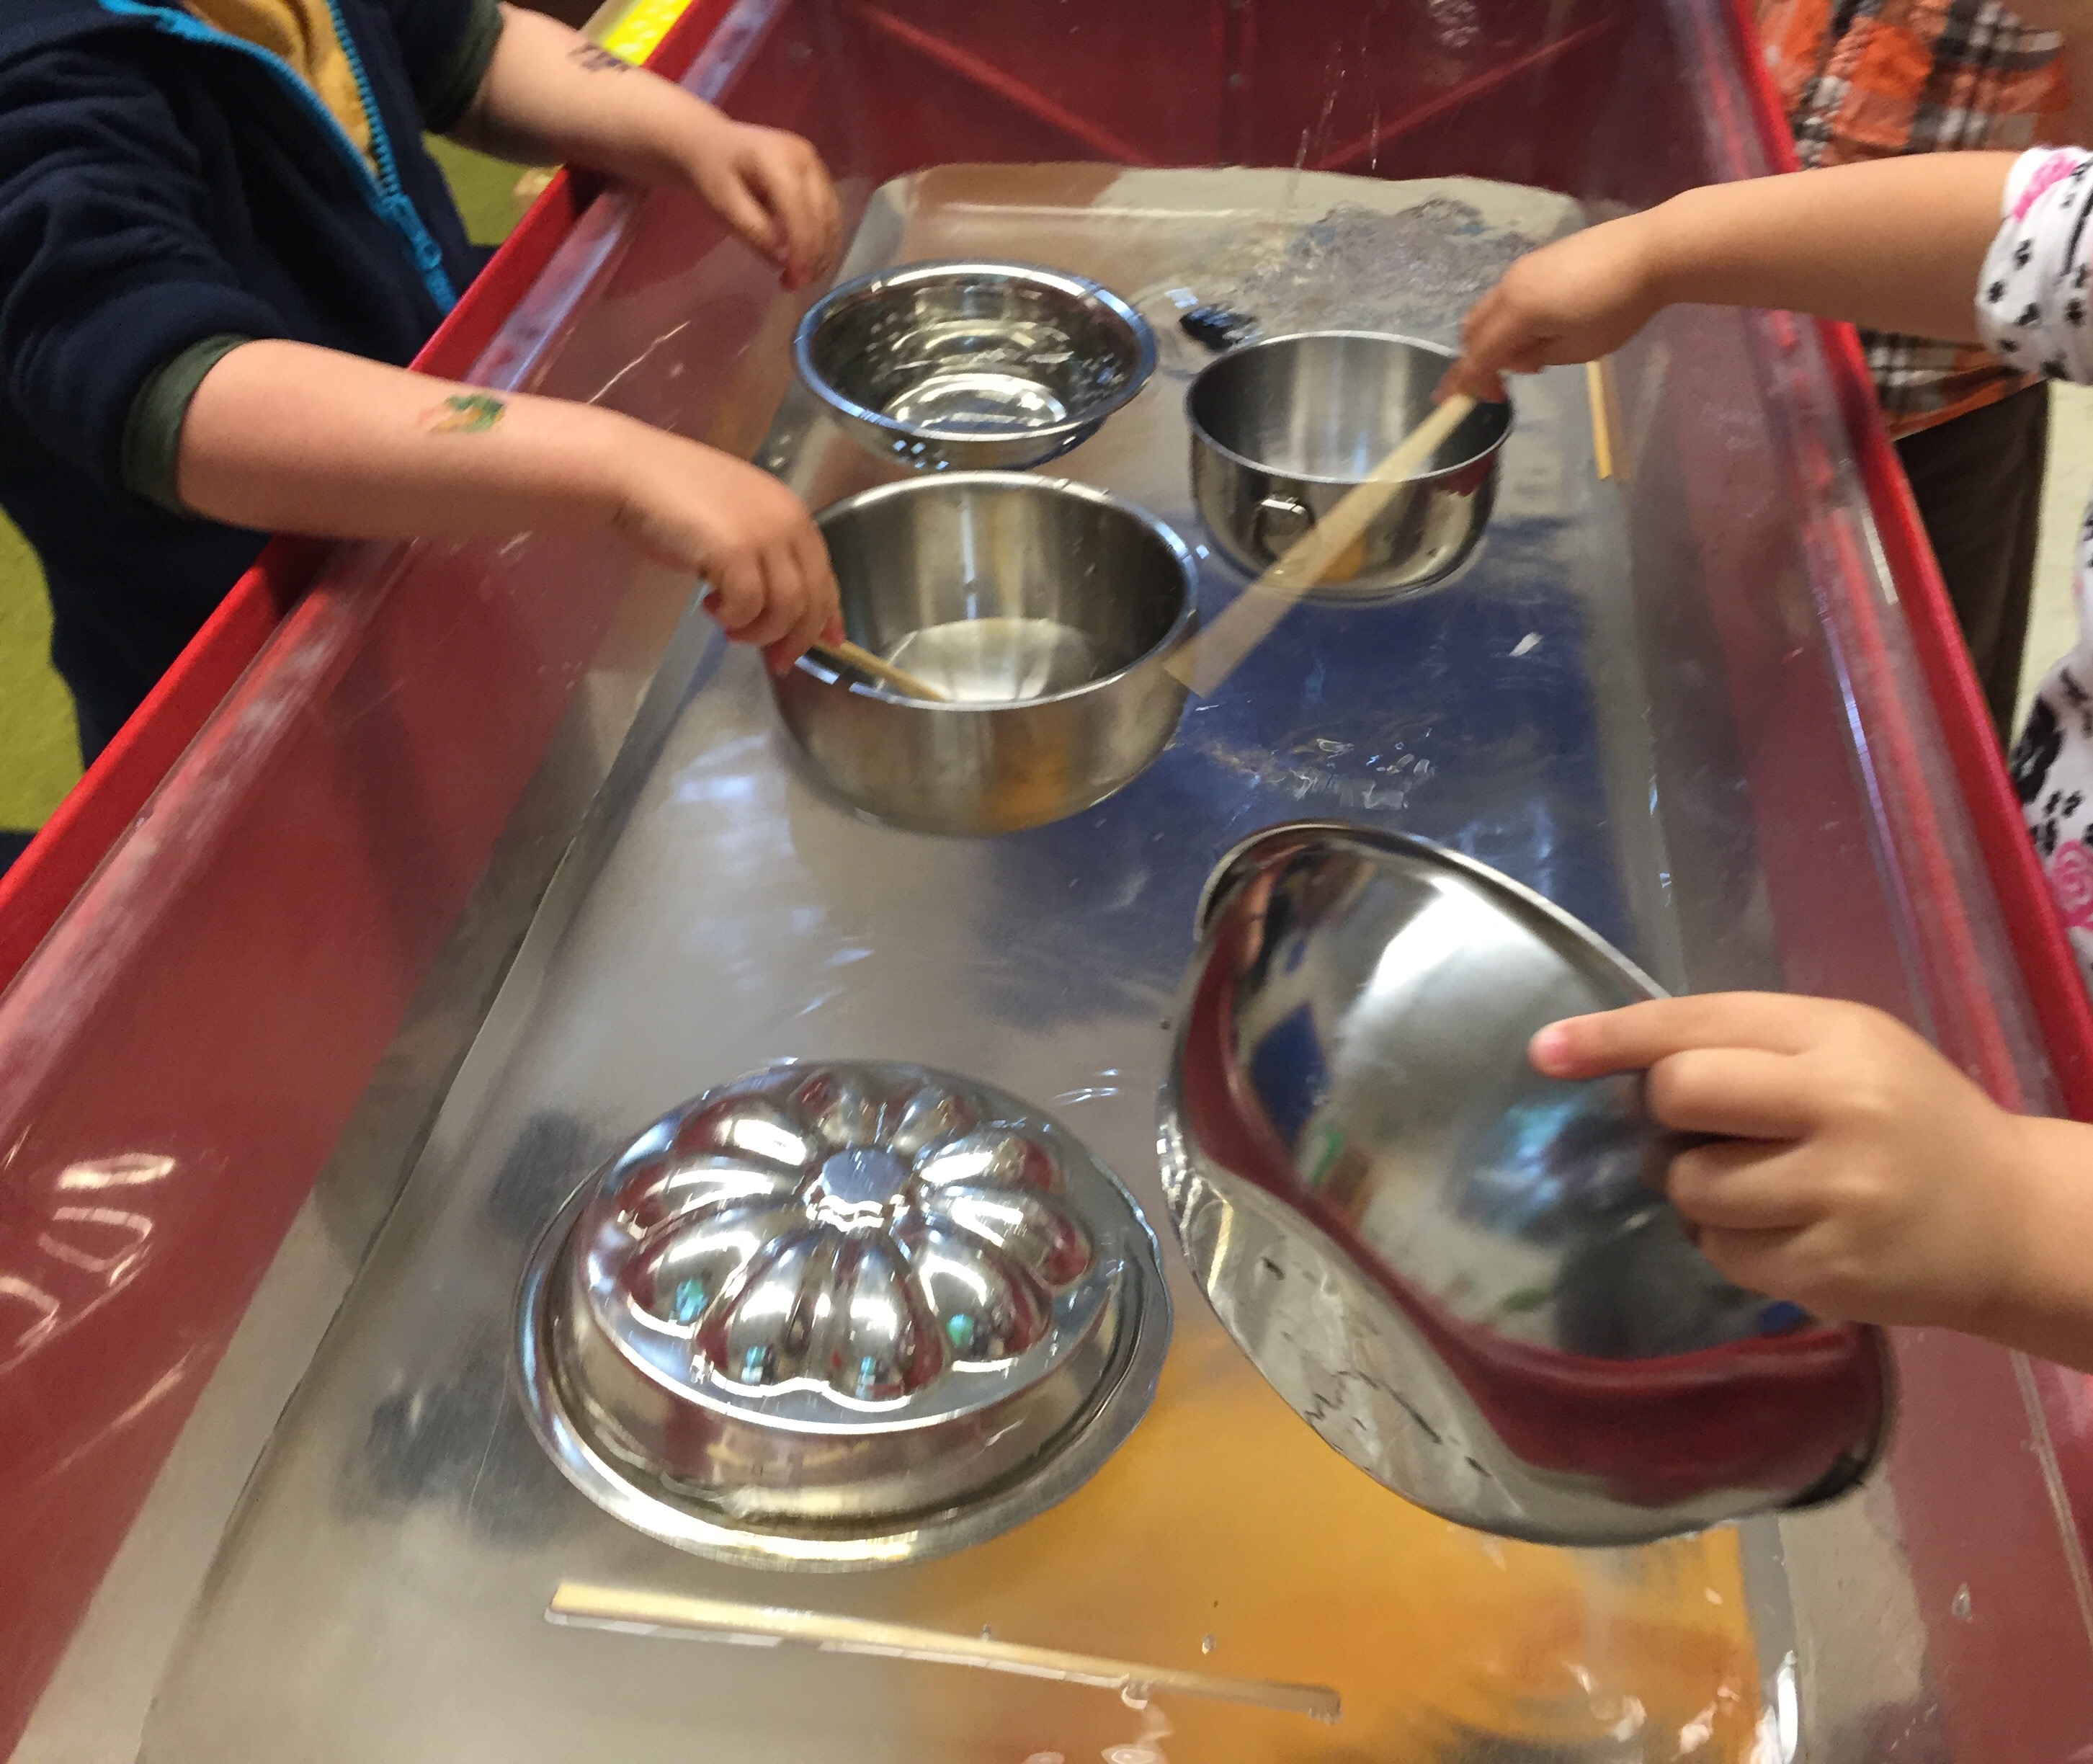 Children play in a water table with water and metal bowls, experiencing sound and wetness.